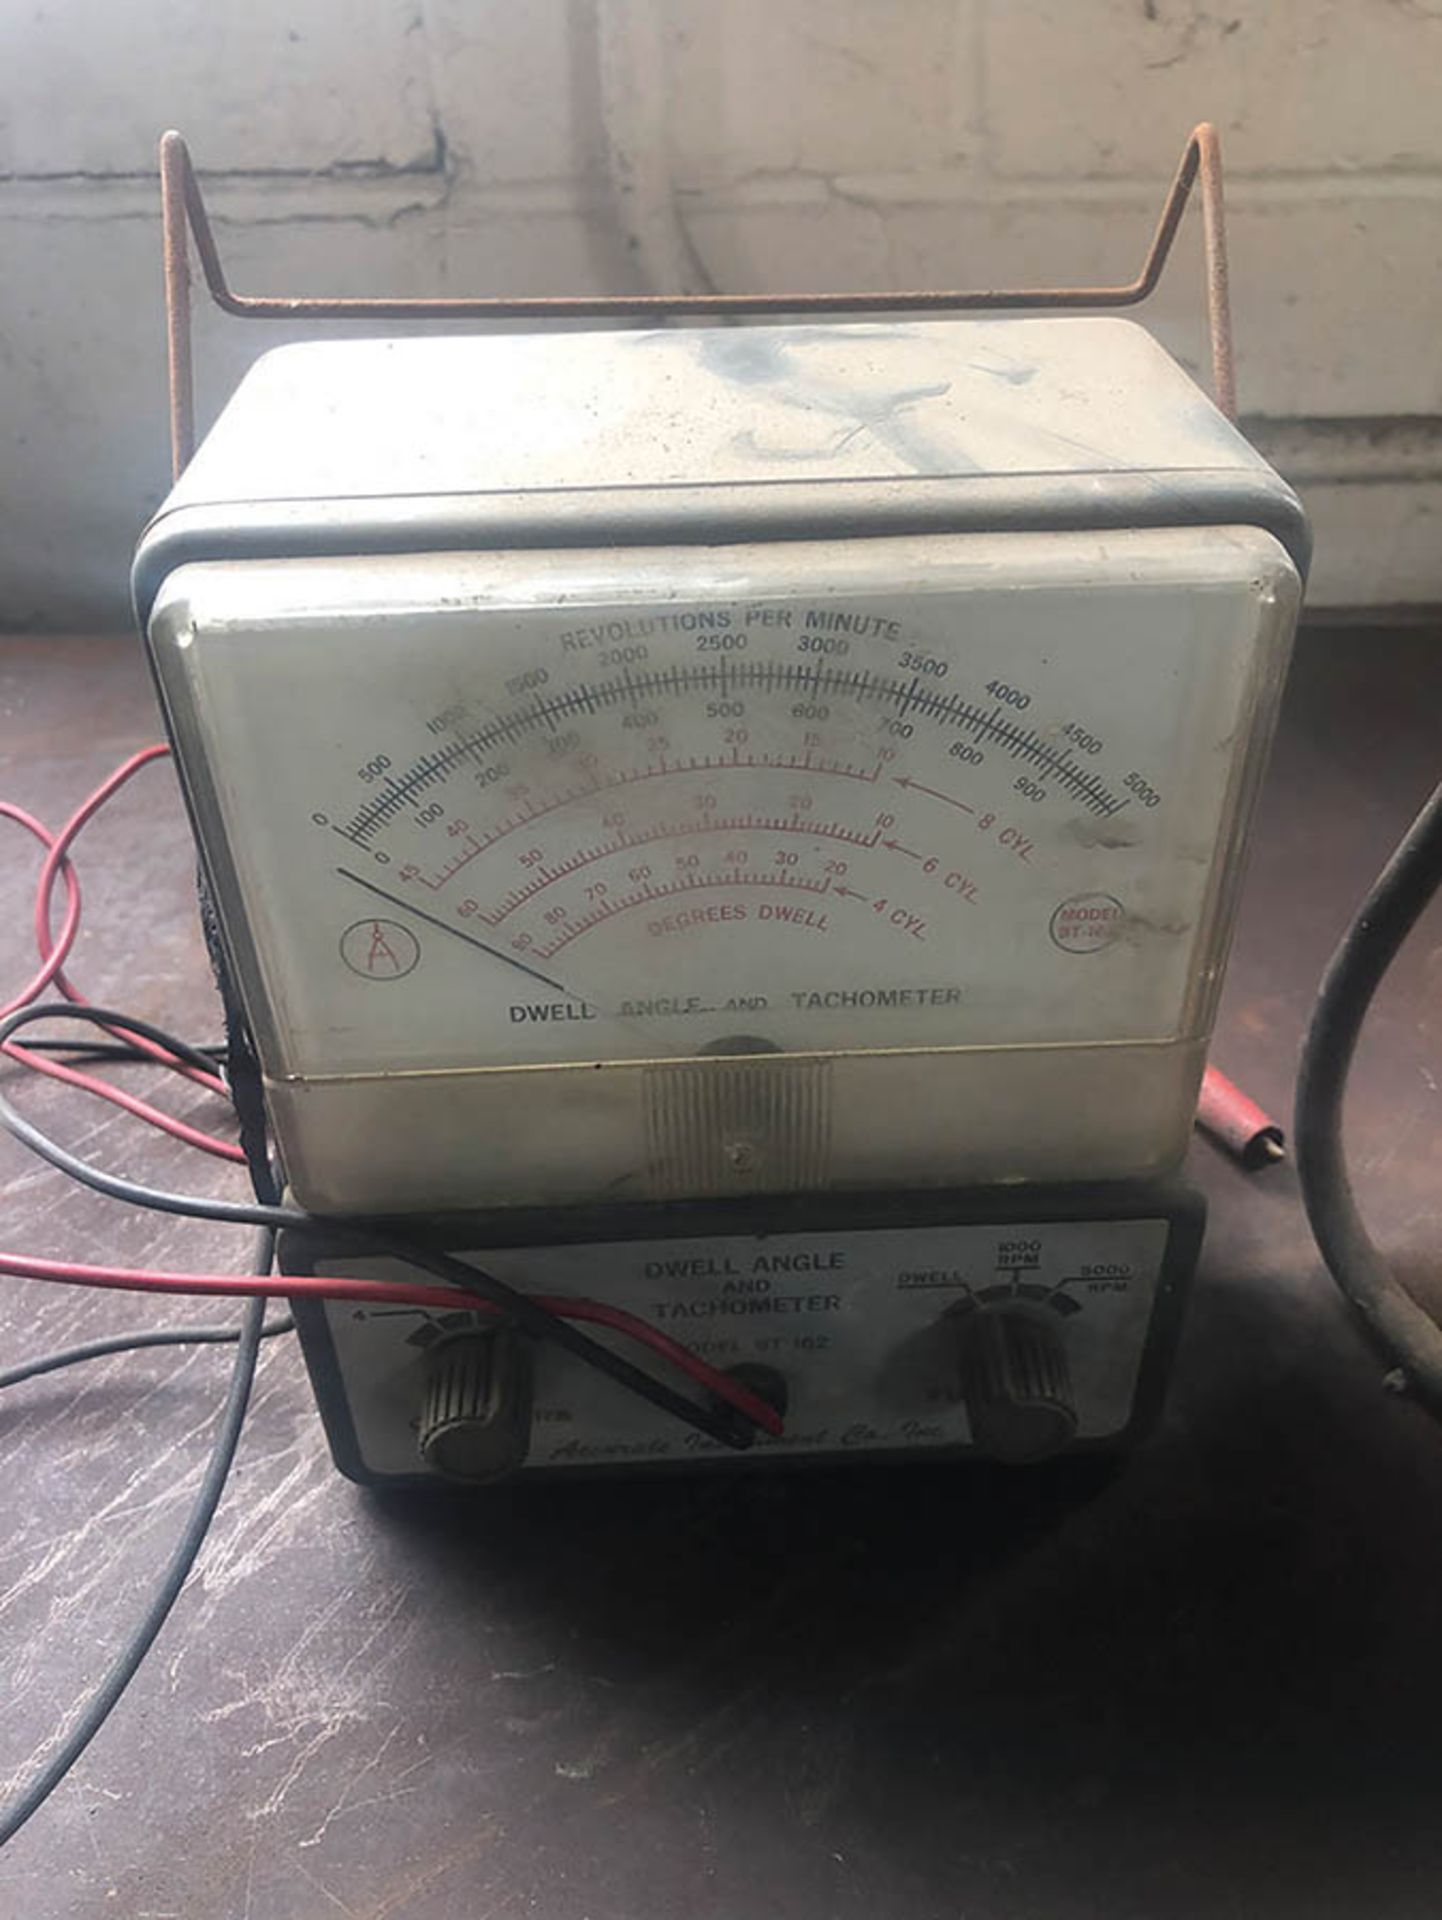 ACCURATE INSTRUMENT COMPANY DWELL ANGLE AND TACHOMETER, MODEL BT162